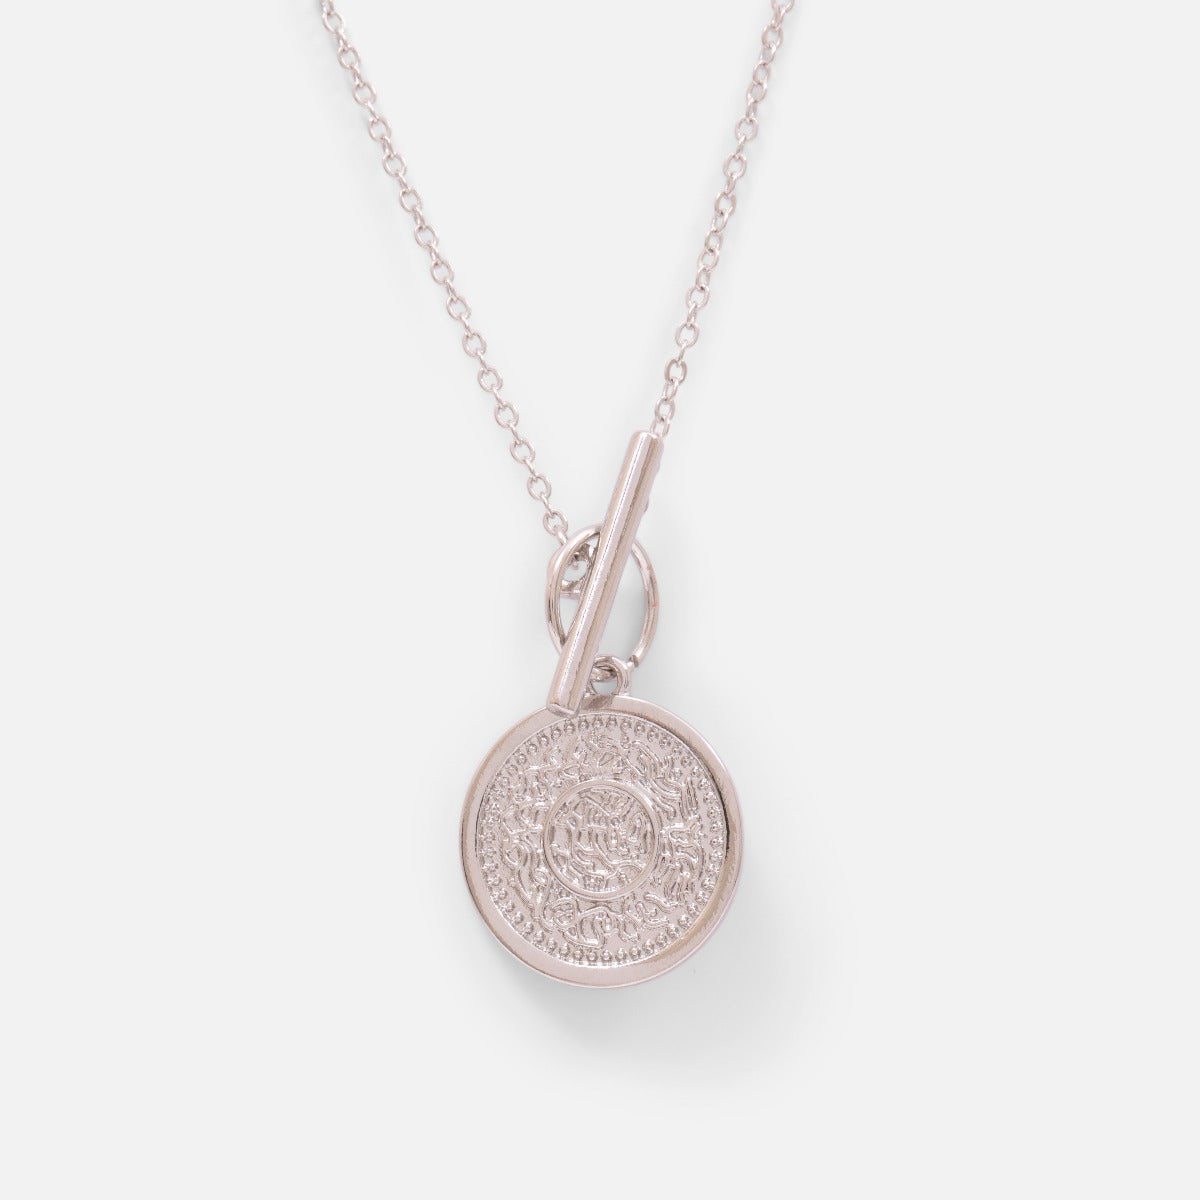 Silvered pendant with a coin charm and a round clasp and  bar